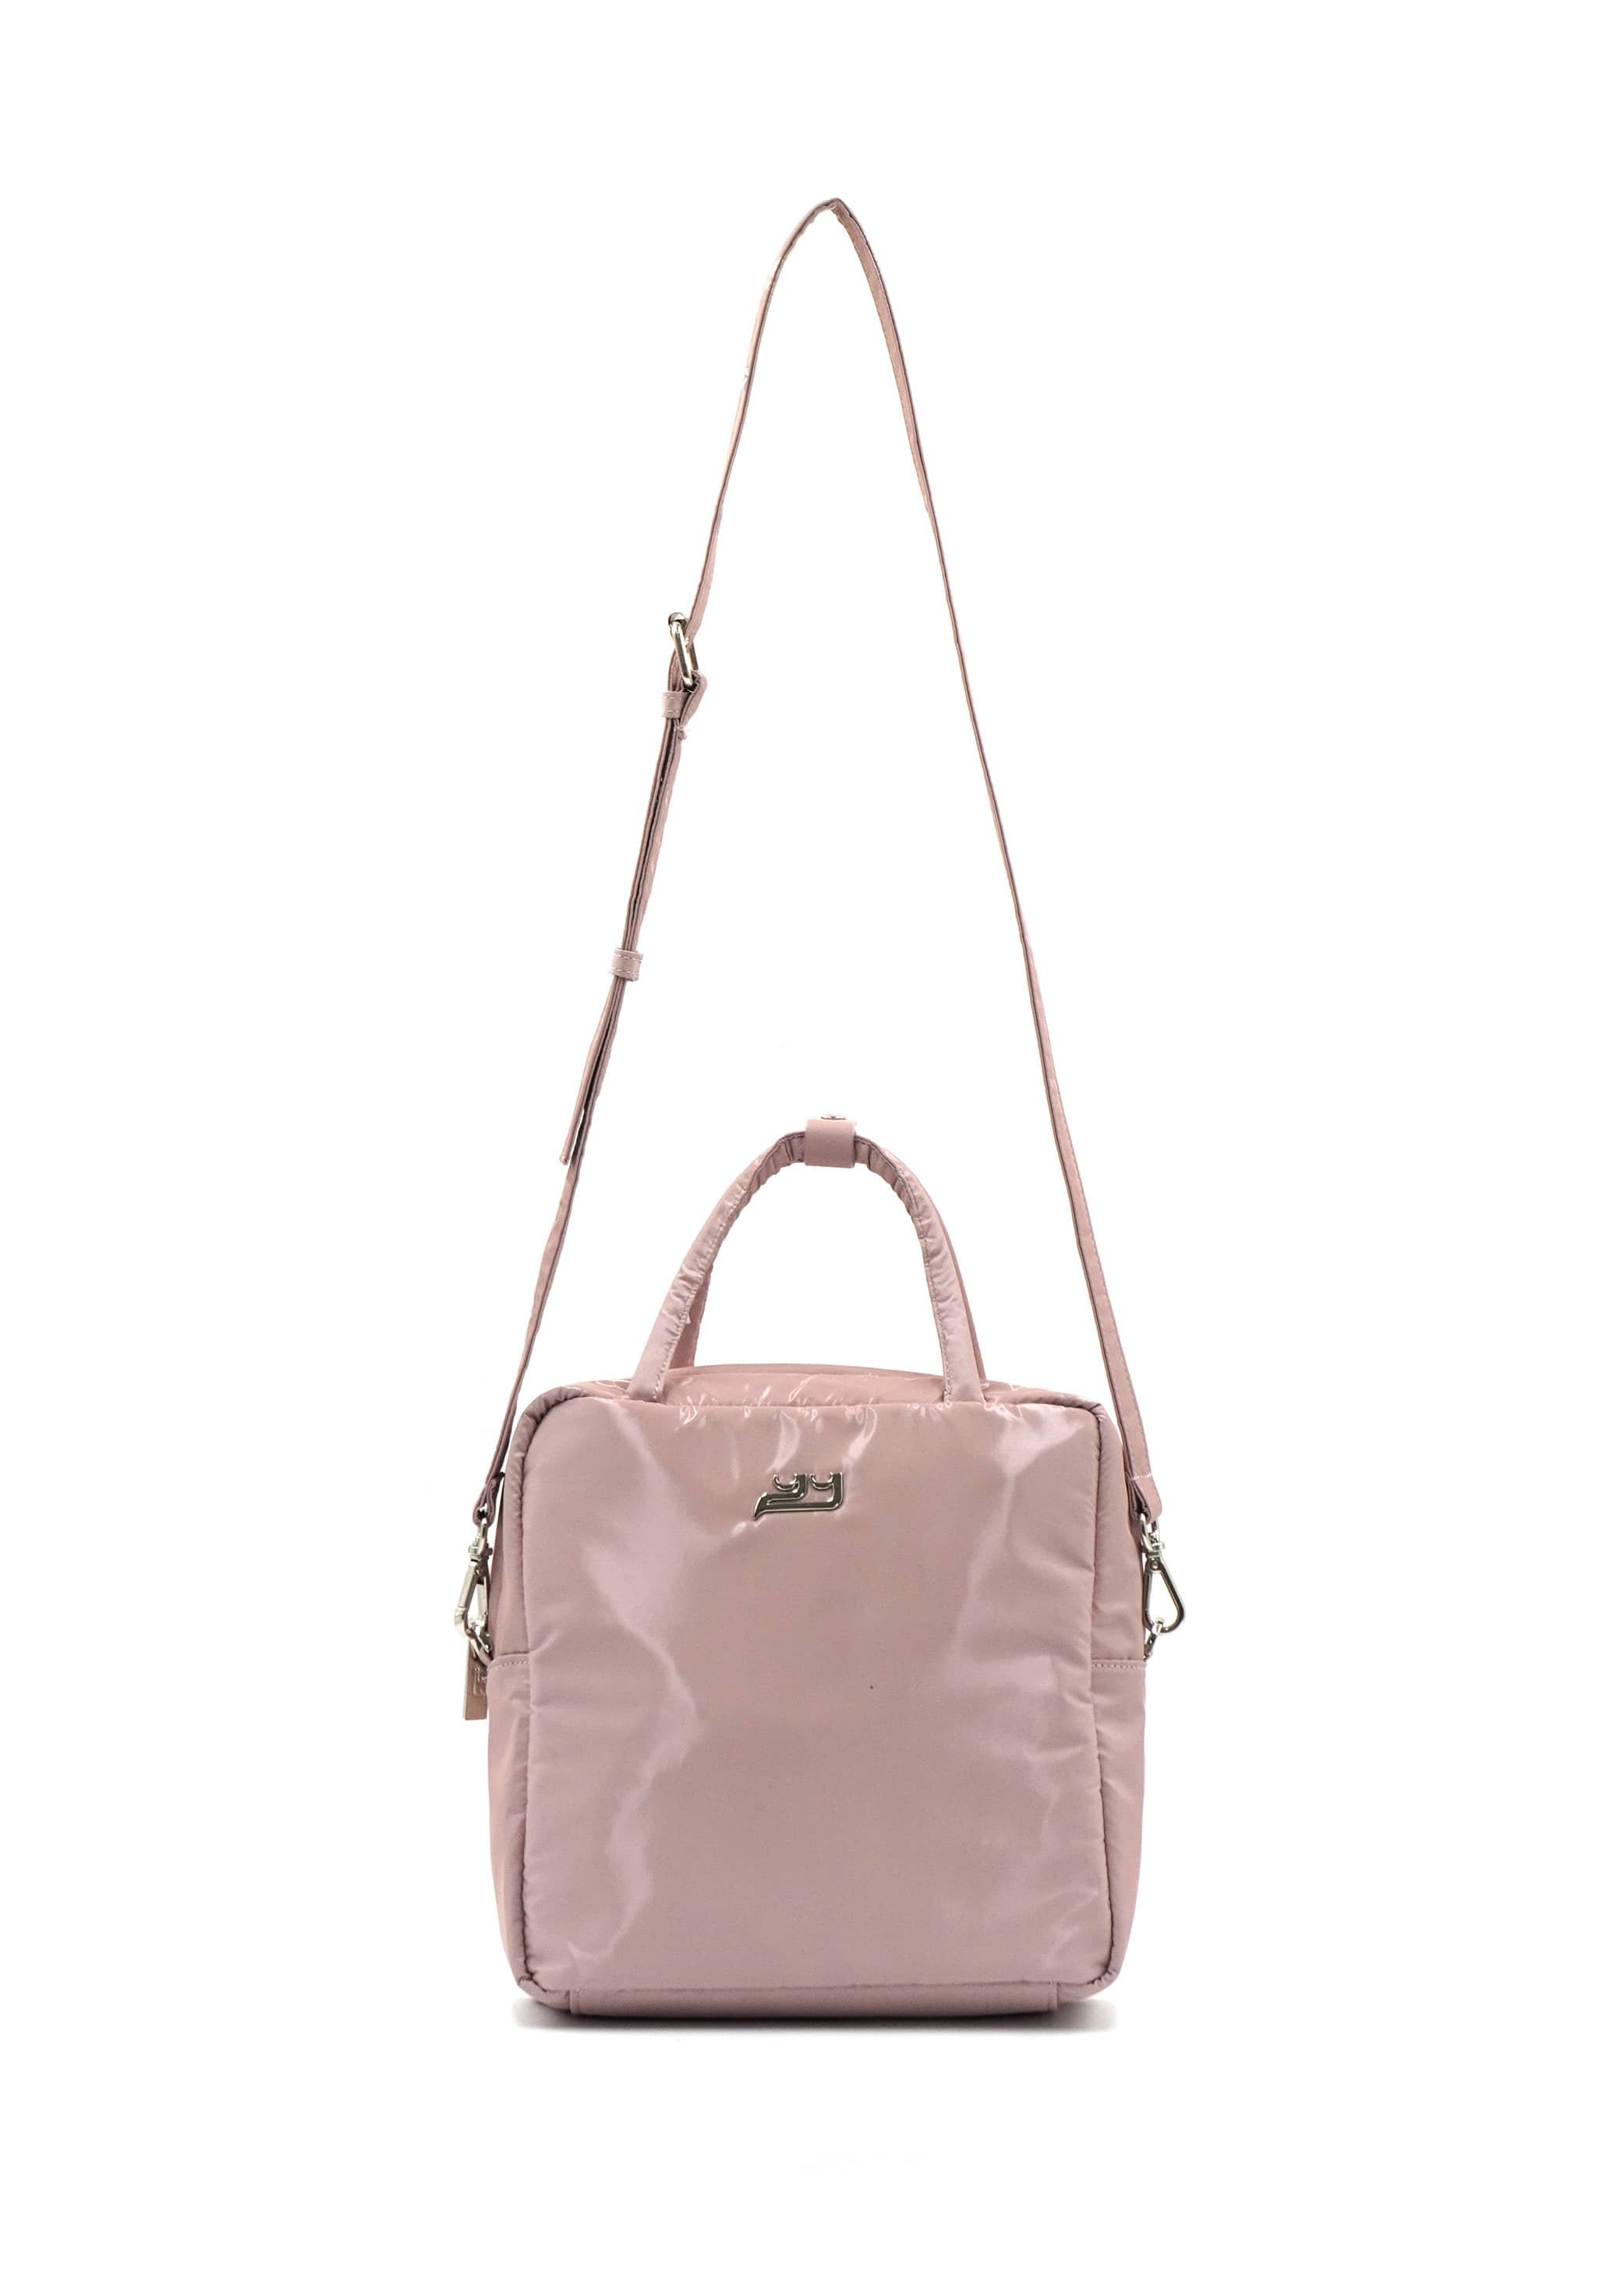 Y.17 Bell Square Bag / BB25 / STONE PINK